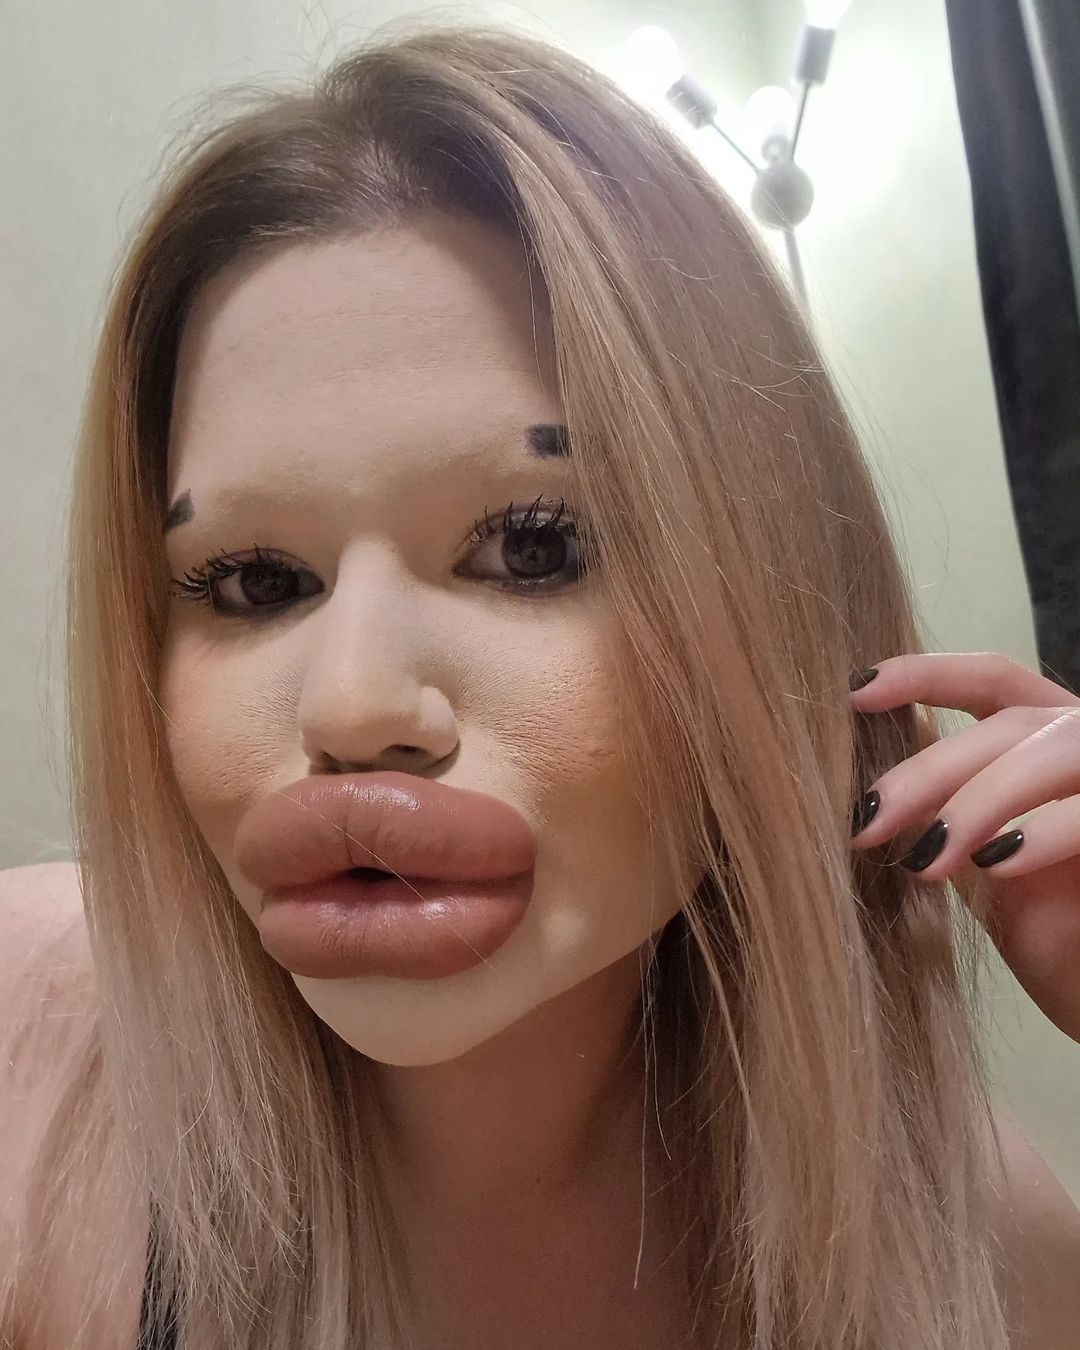 Woman With Worlds Biggest Lips Says She Cant Find Love Of Her Life pic